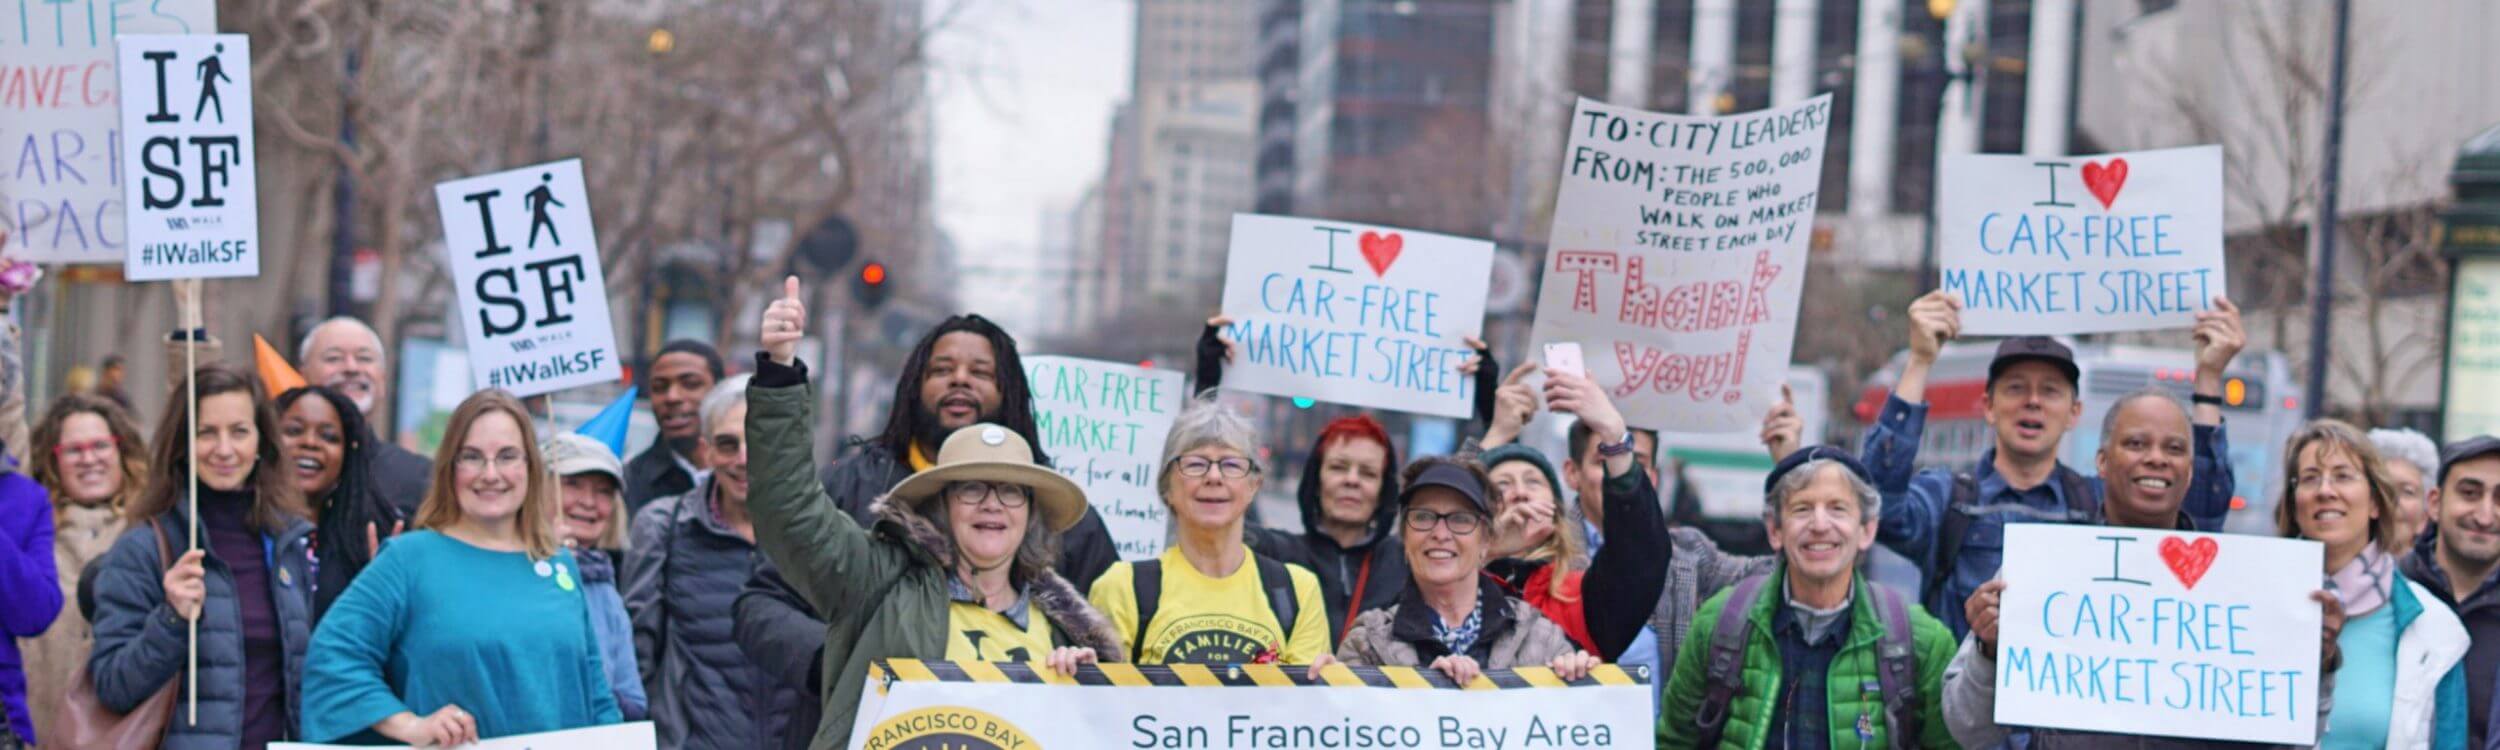 We will not stop pushing for a Market Street that prioritizes safety